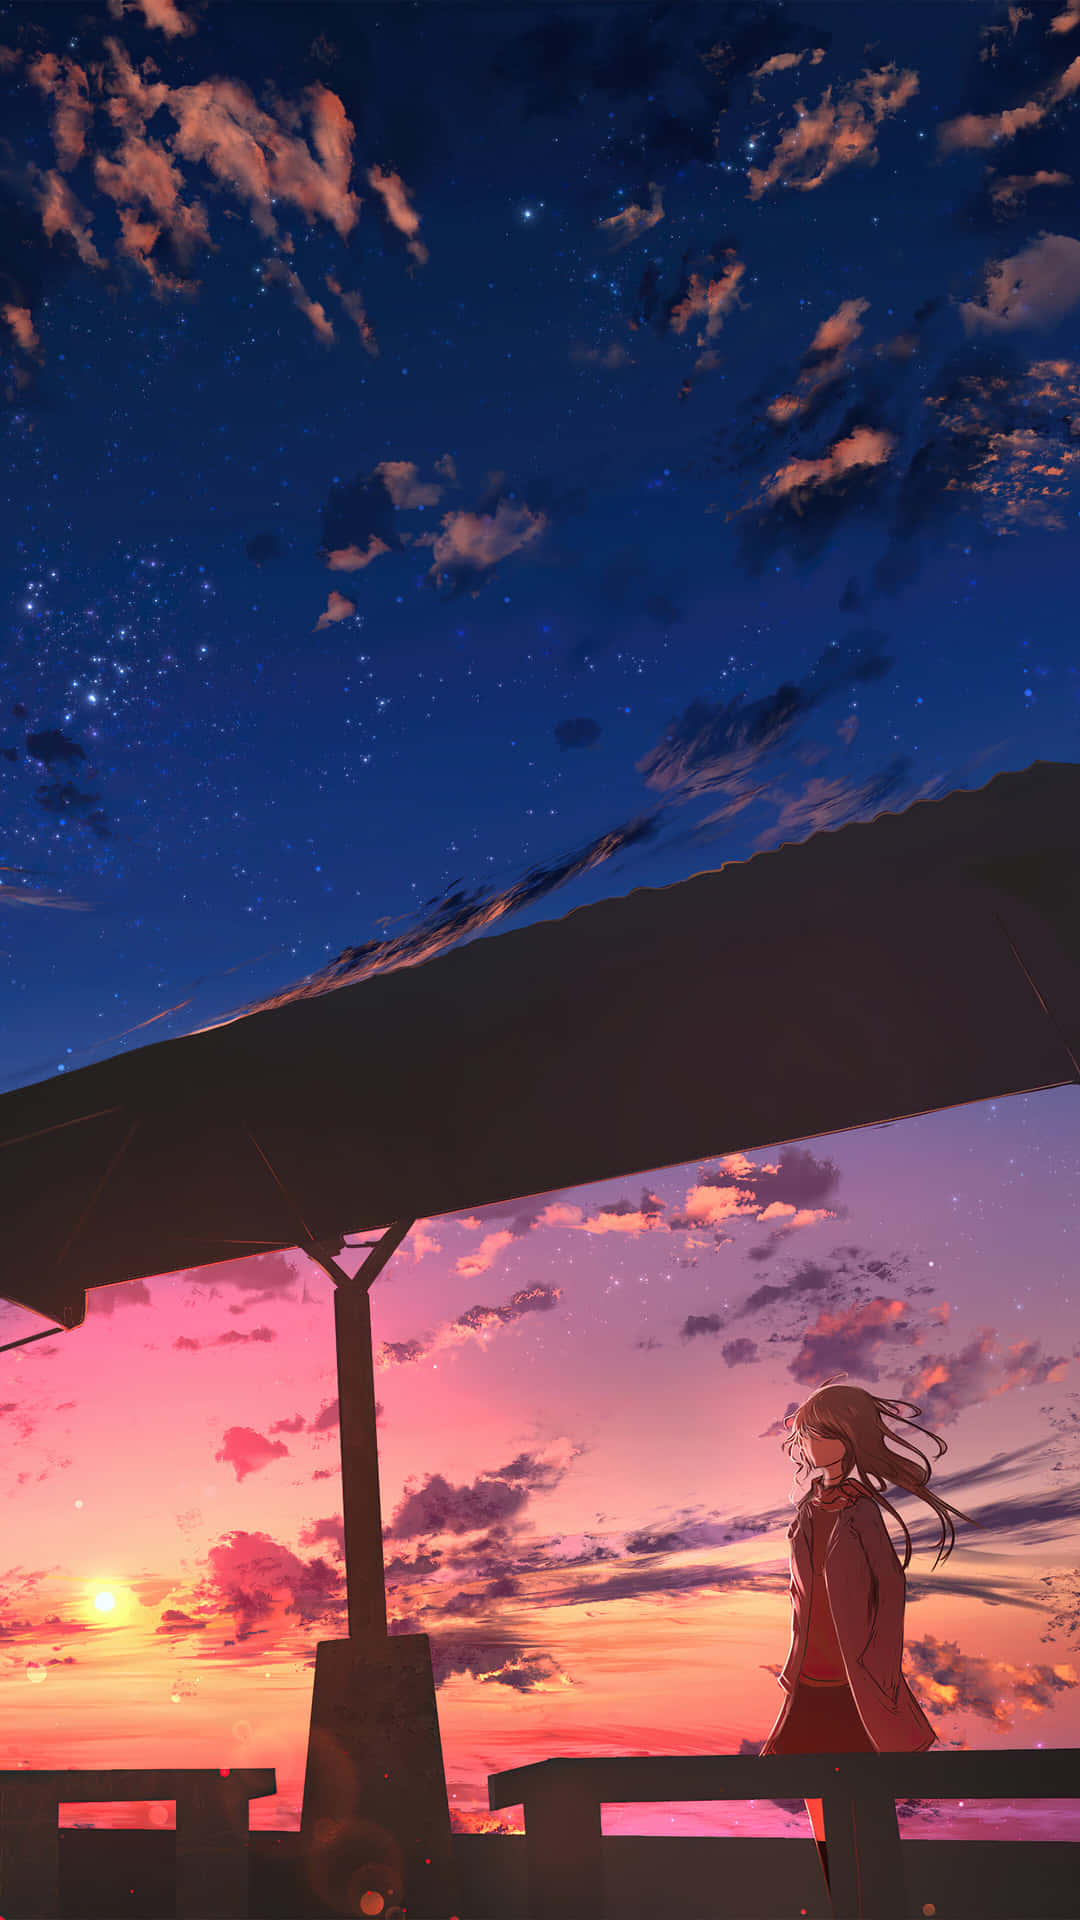 Capture the perfect sunset with the Anime Sunset Iphone Wallpaper